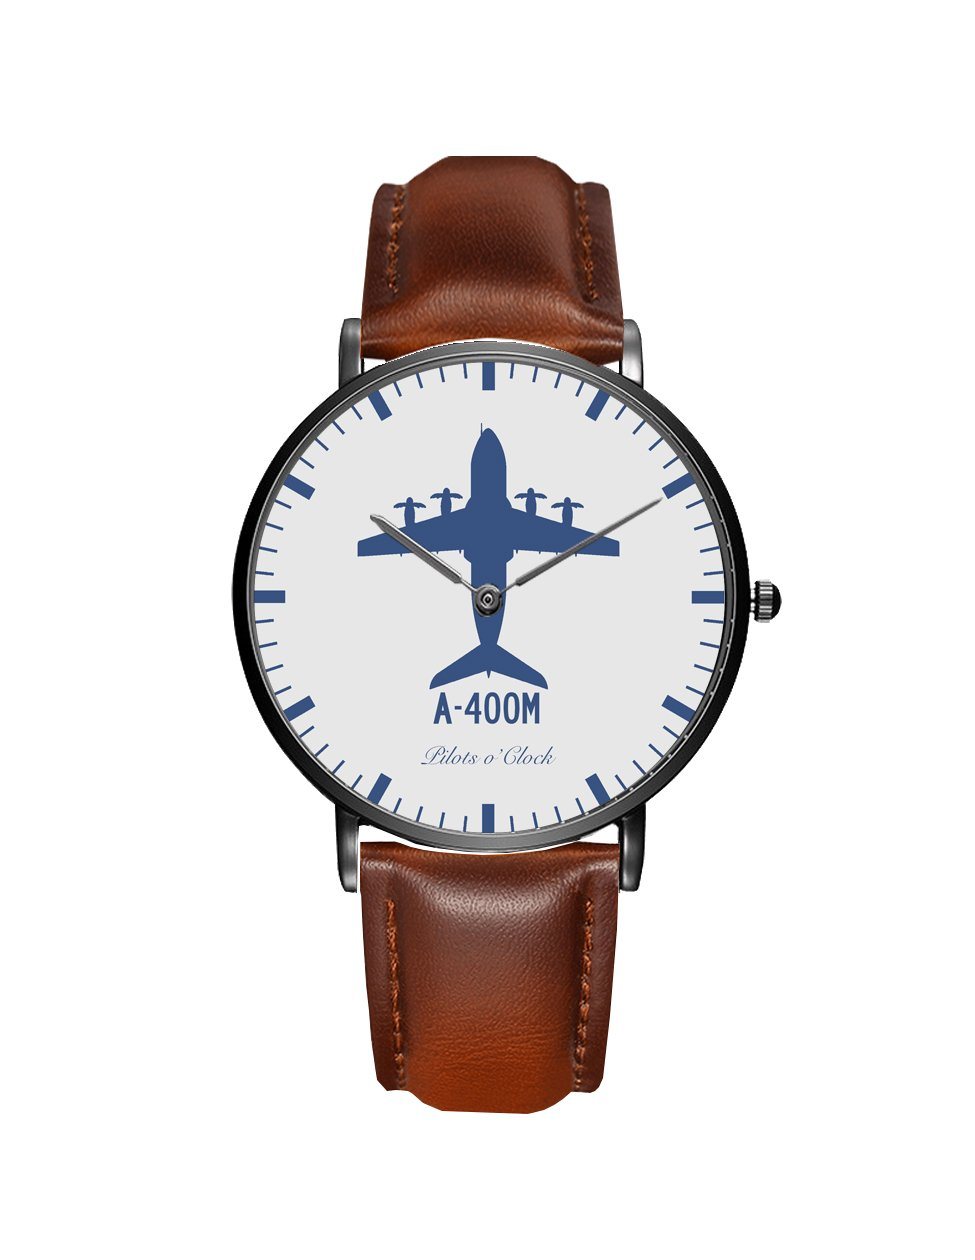 Airbus A400M Leather Strap Watches Pilot Eyes Store Black & Brown Leather Strap 